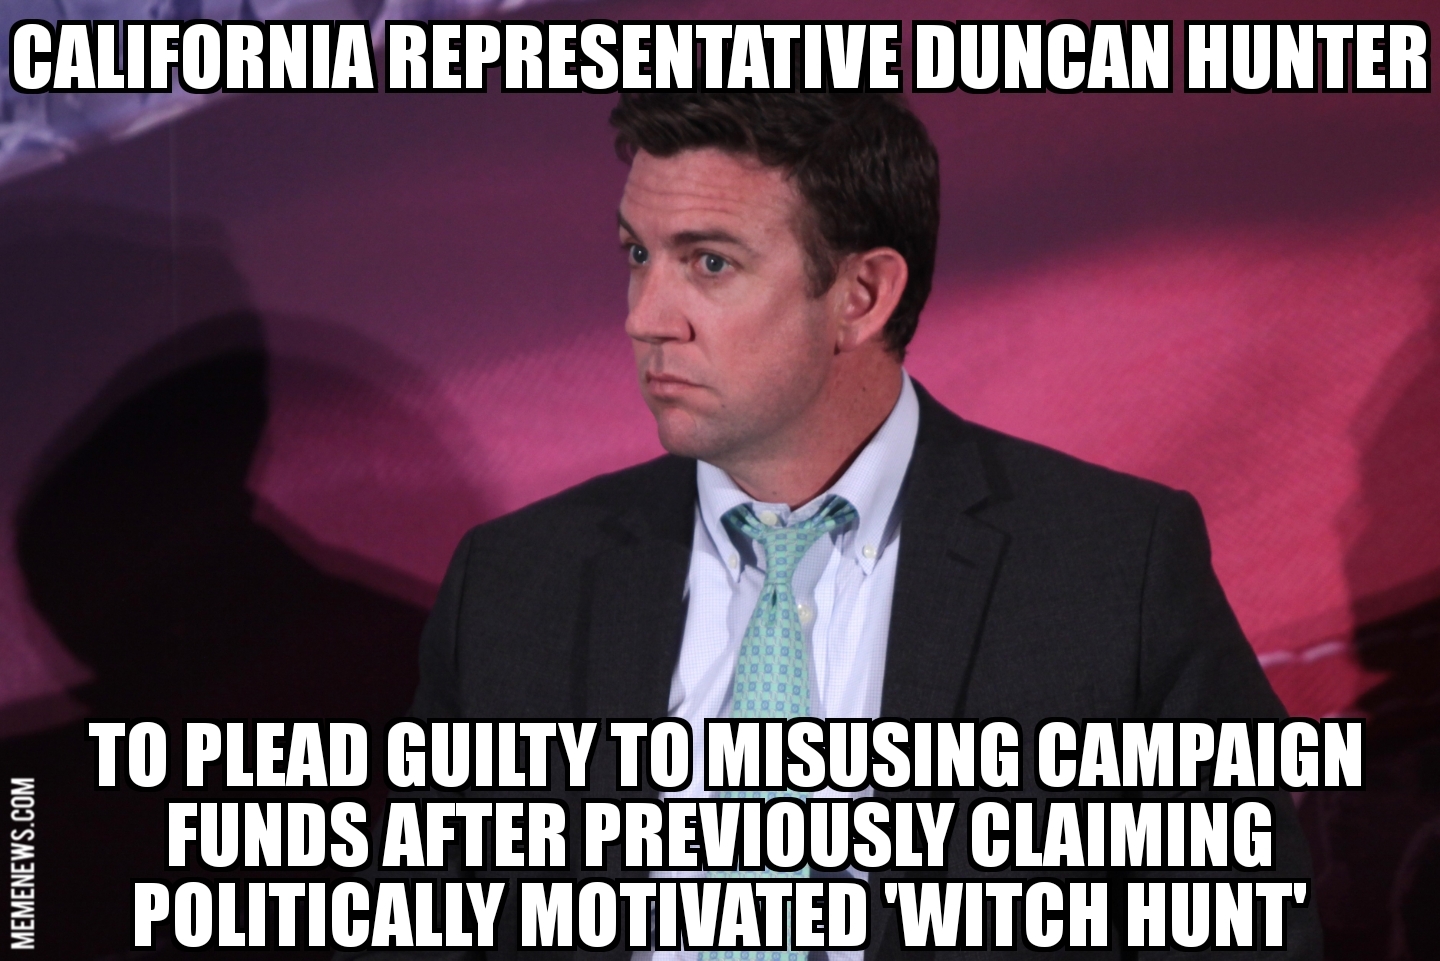 California Rep. Duncan Hunter to plead guilty to misusing campaign funds